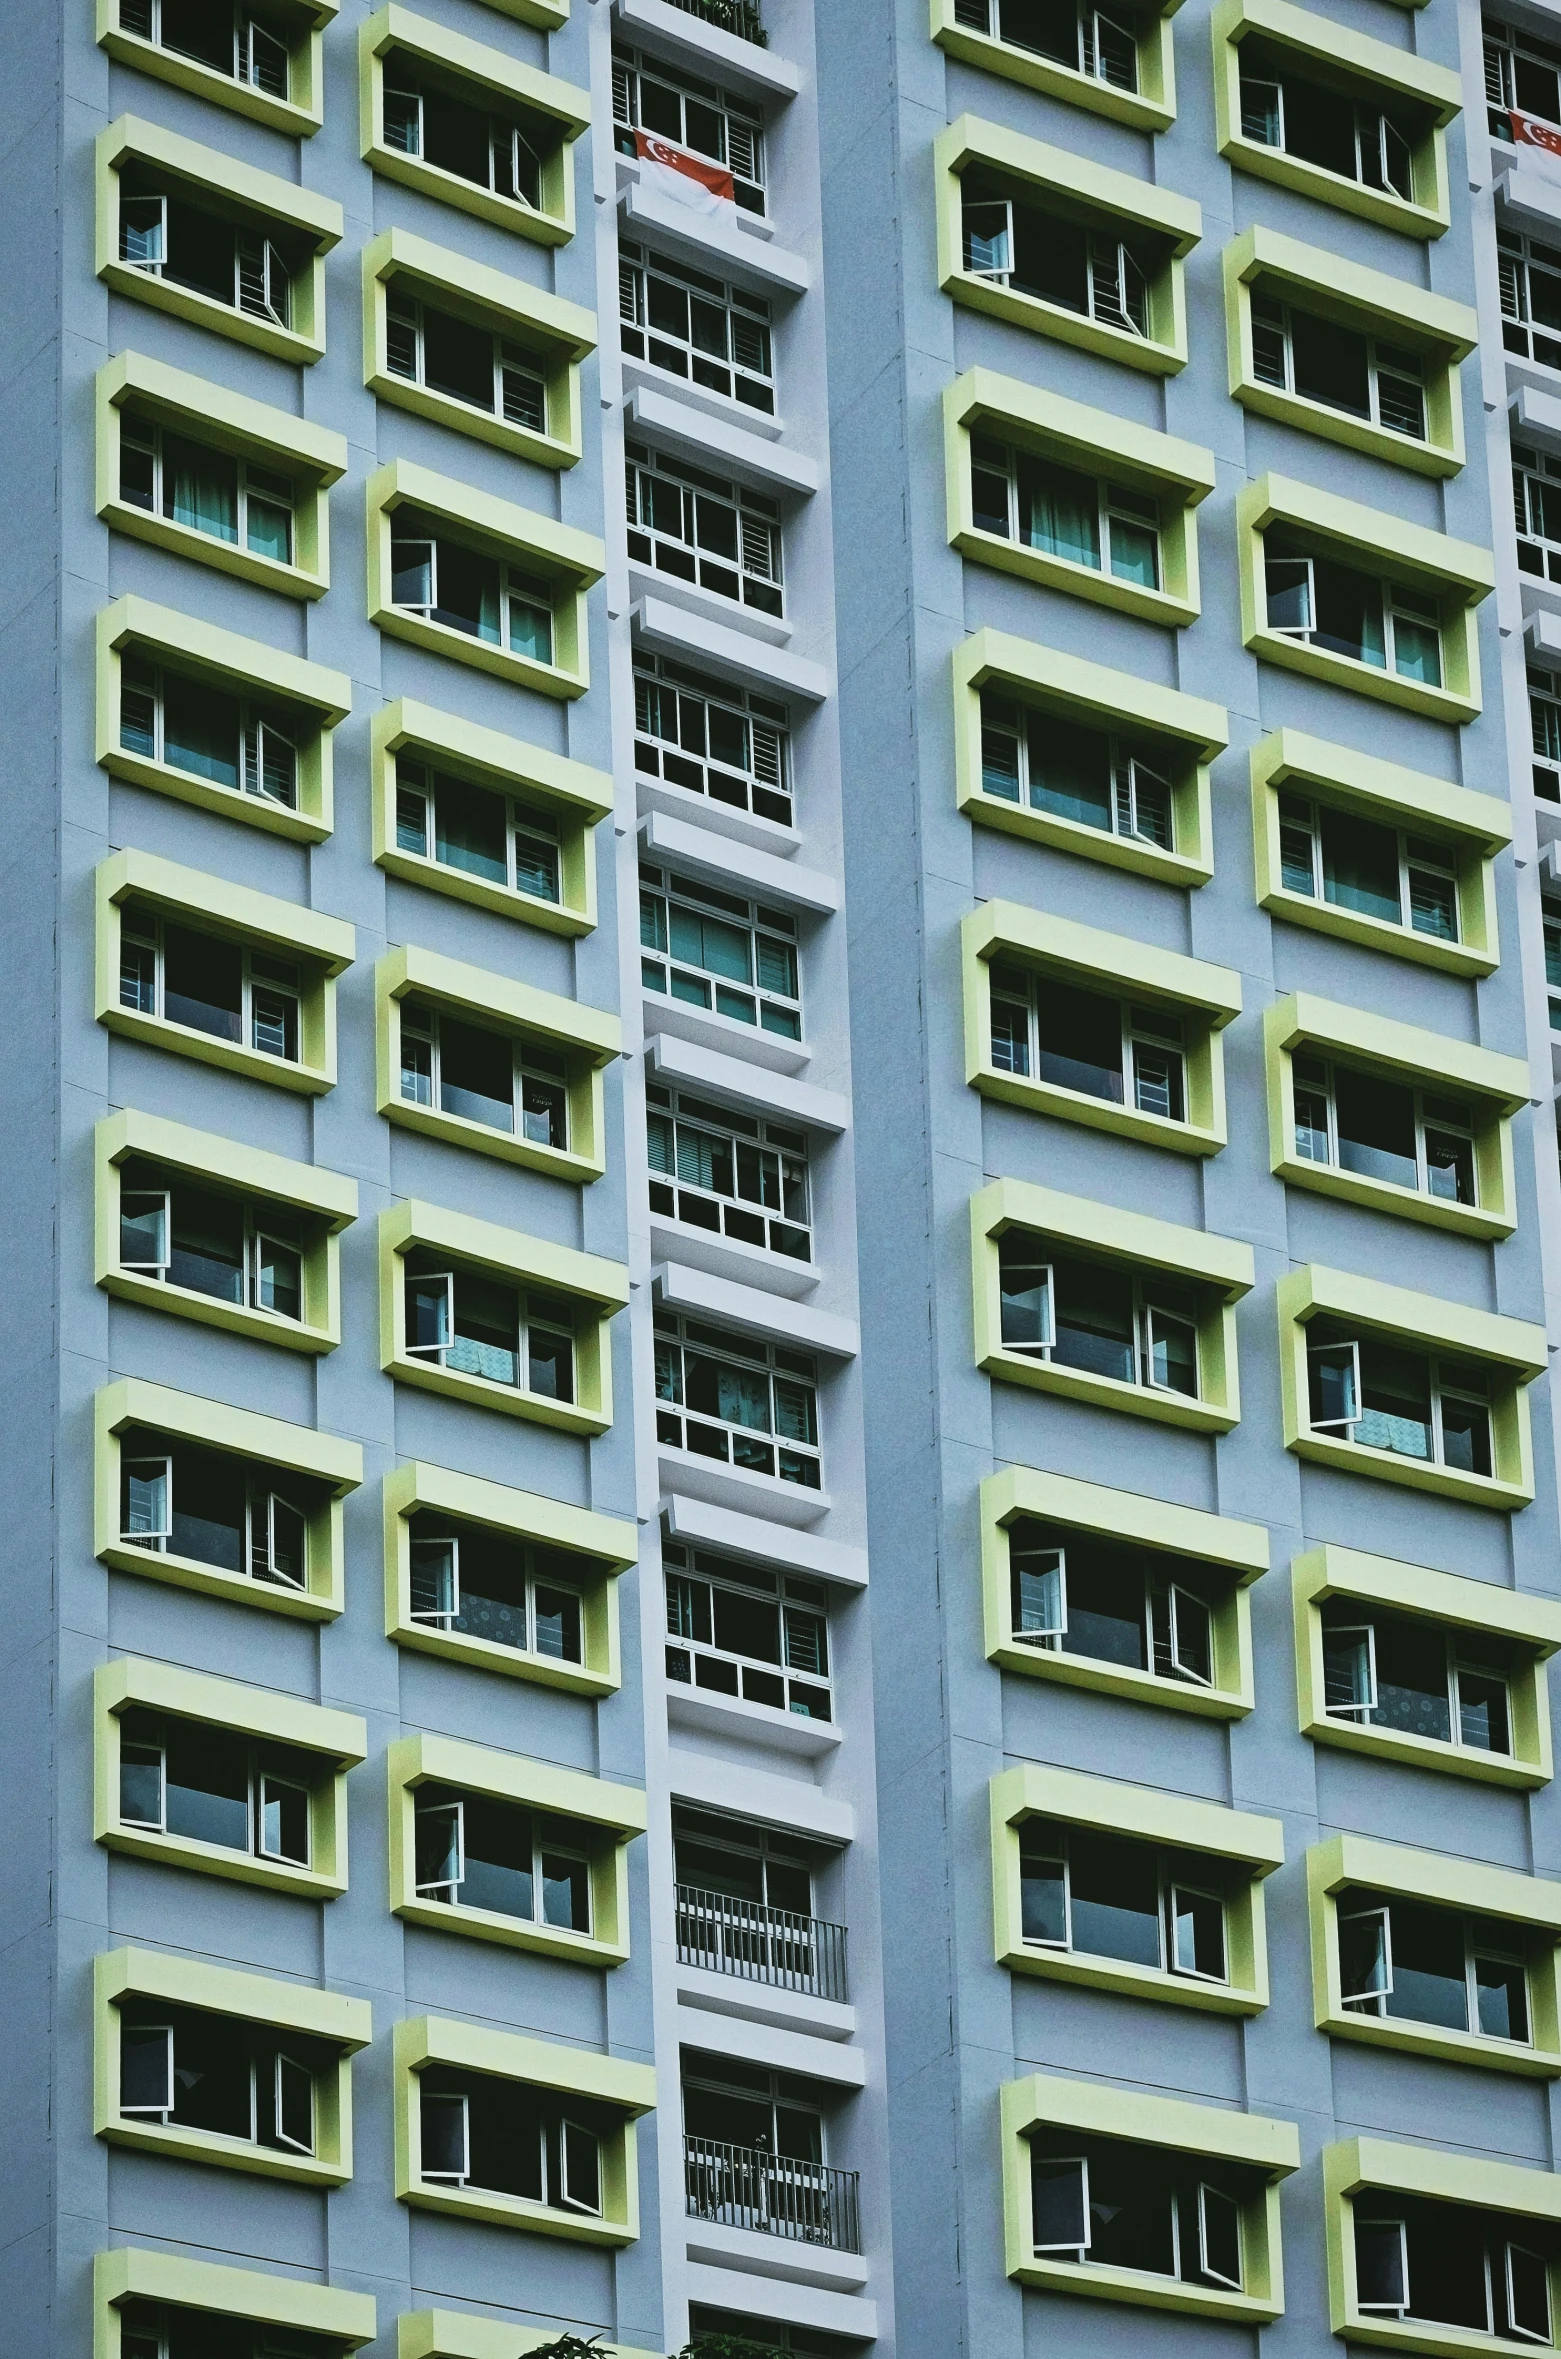 two tall, narrow building windows filled with balconies